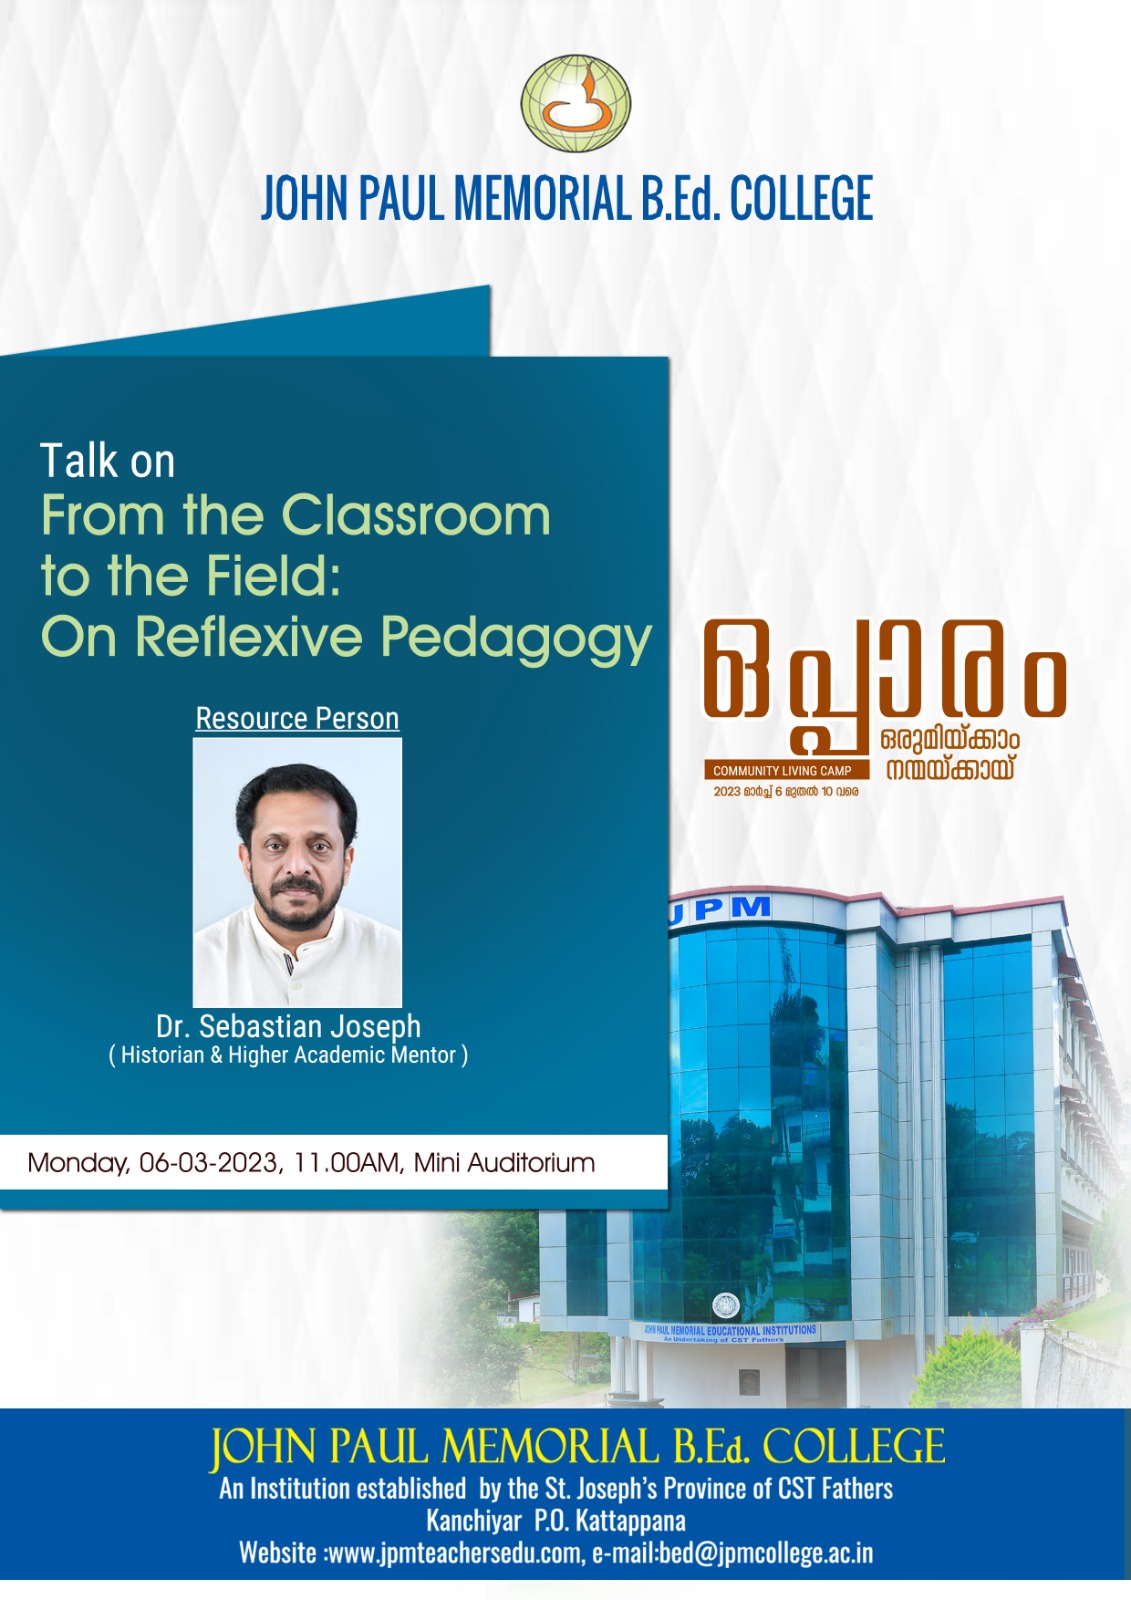 Talk on From the Classroom to the Field:On Reflexive Pedagogy